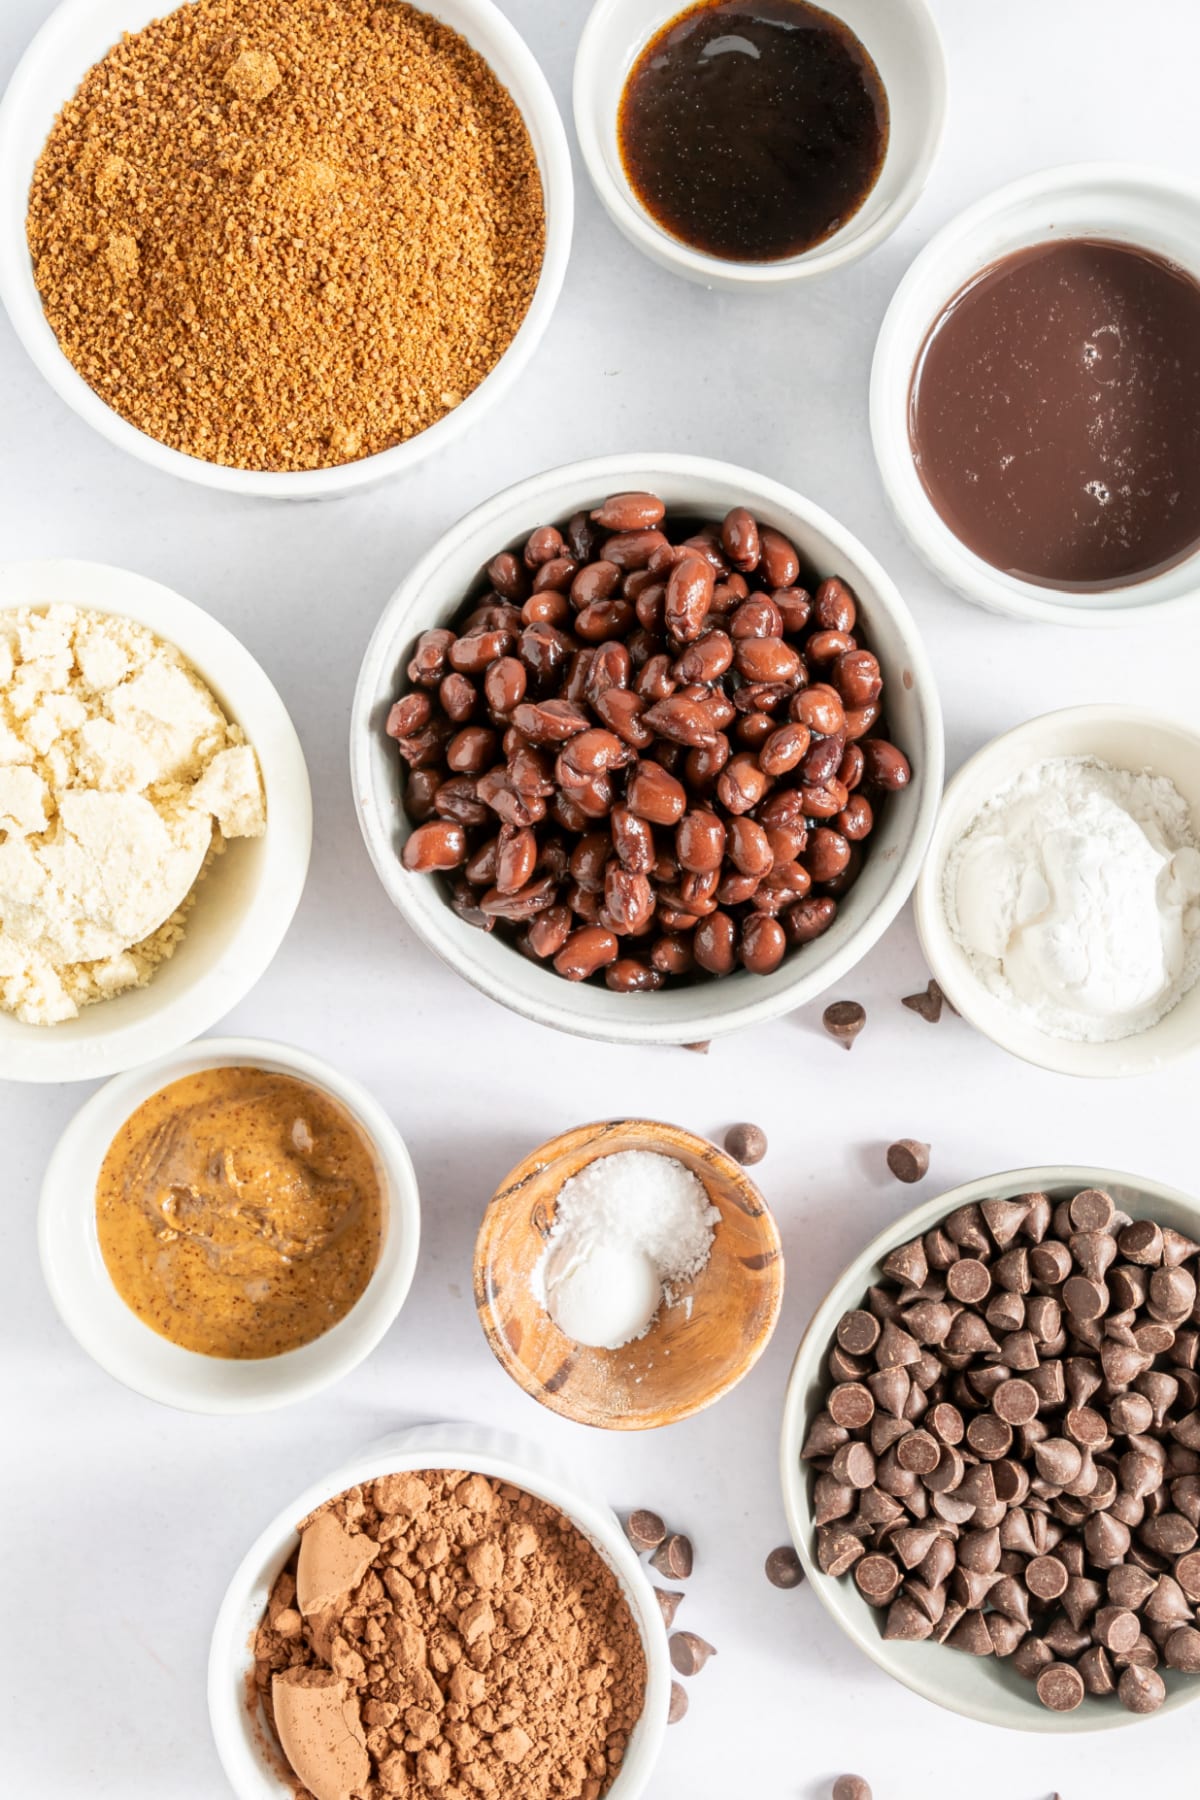 Overhead view of several small bowls of ingredients for black bean brownies: sugar, black beans, chocolate chips, cocoa powder. White bowls full of ingredients in various shades of brown on a white surface.